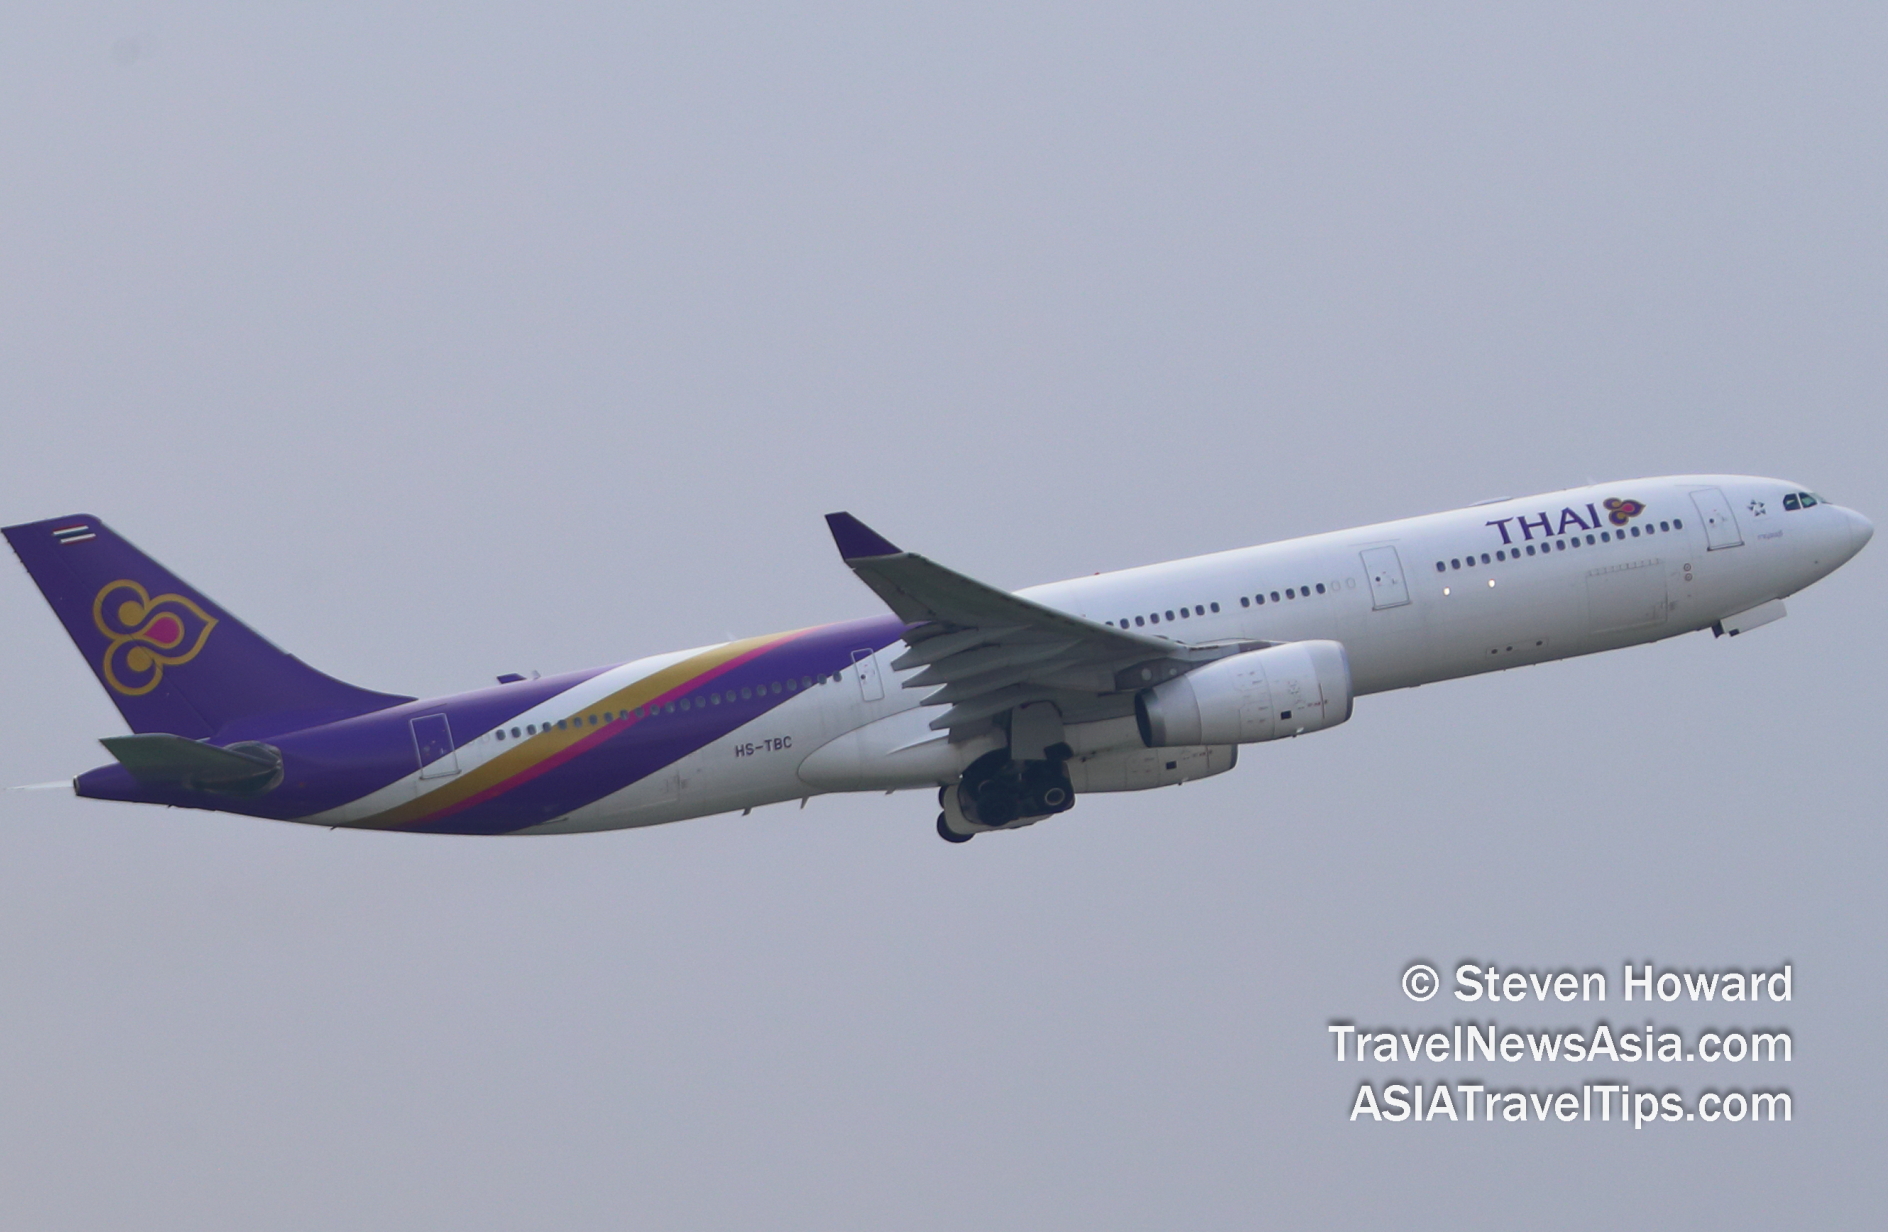 Thai Airways A330 reg: HS-TBC. Picture by Steven Howard of TravelNewsAsia.com Click to enlarge.